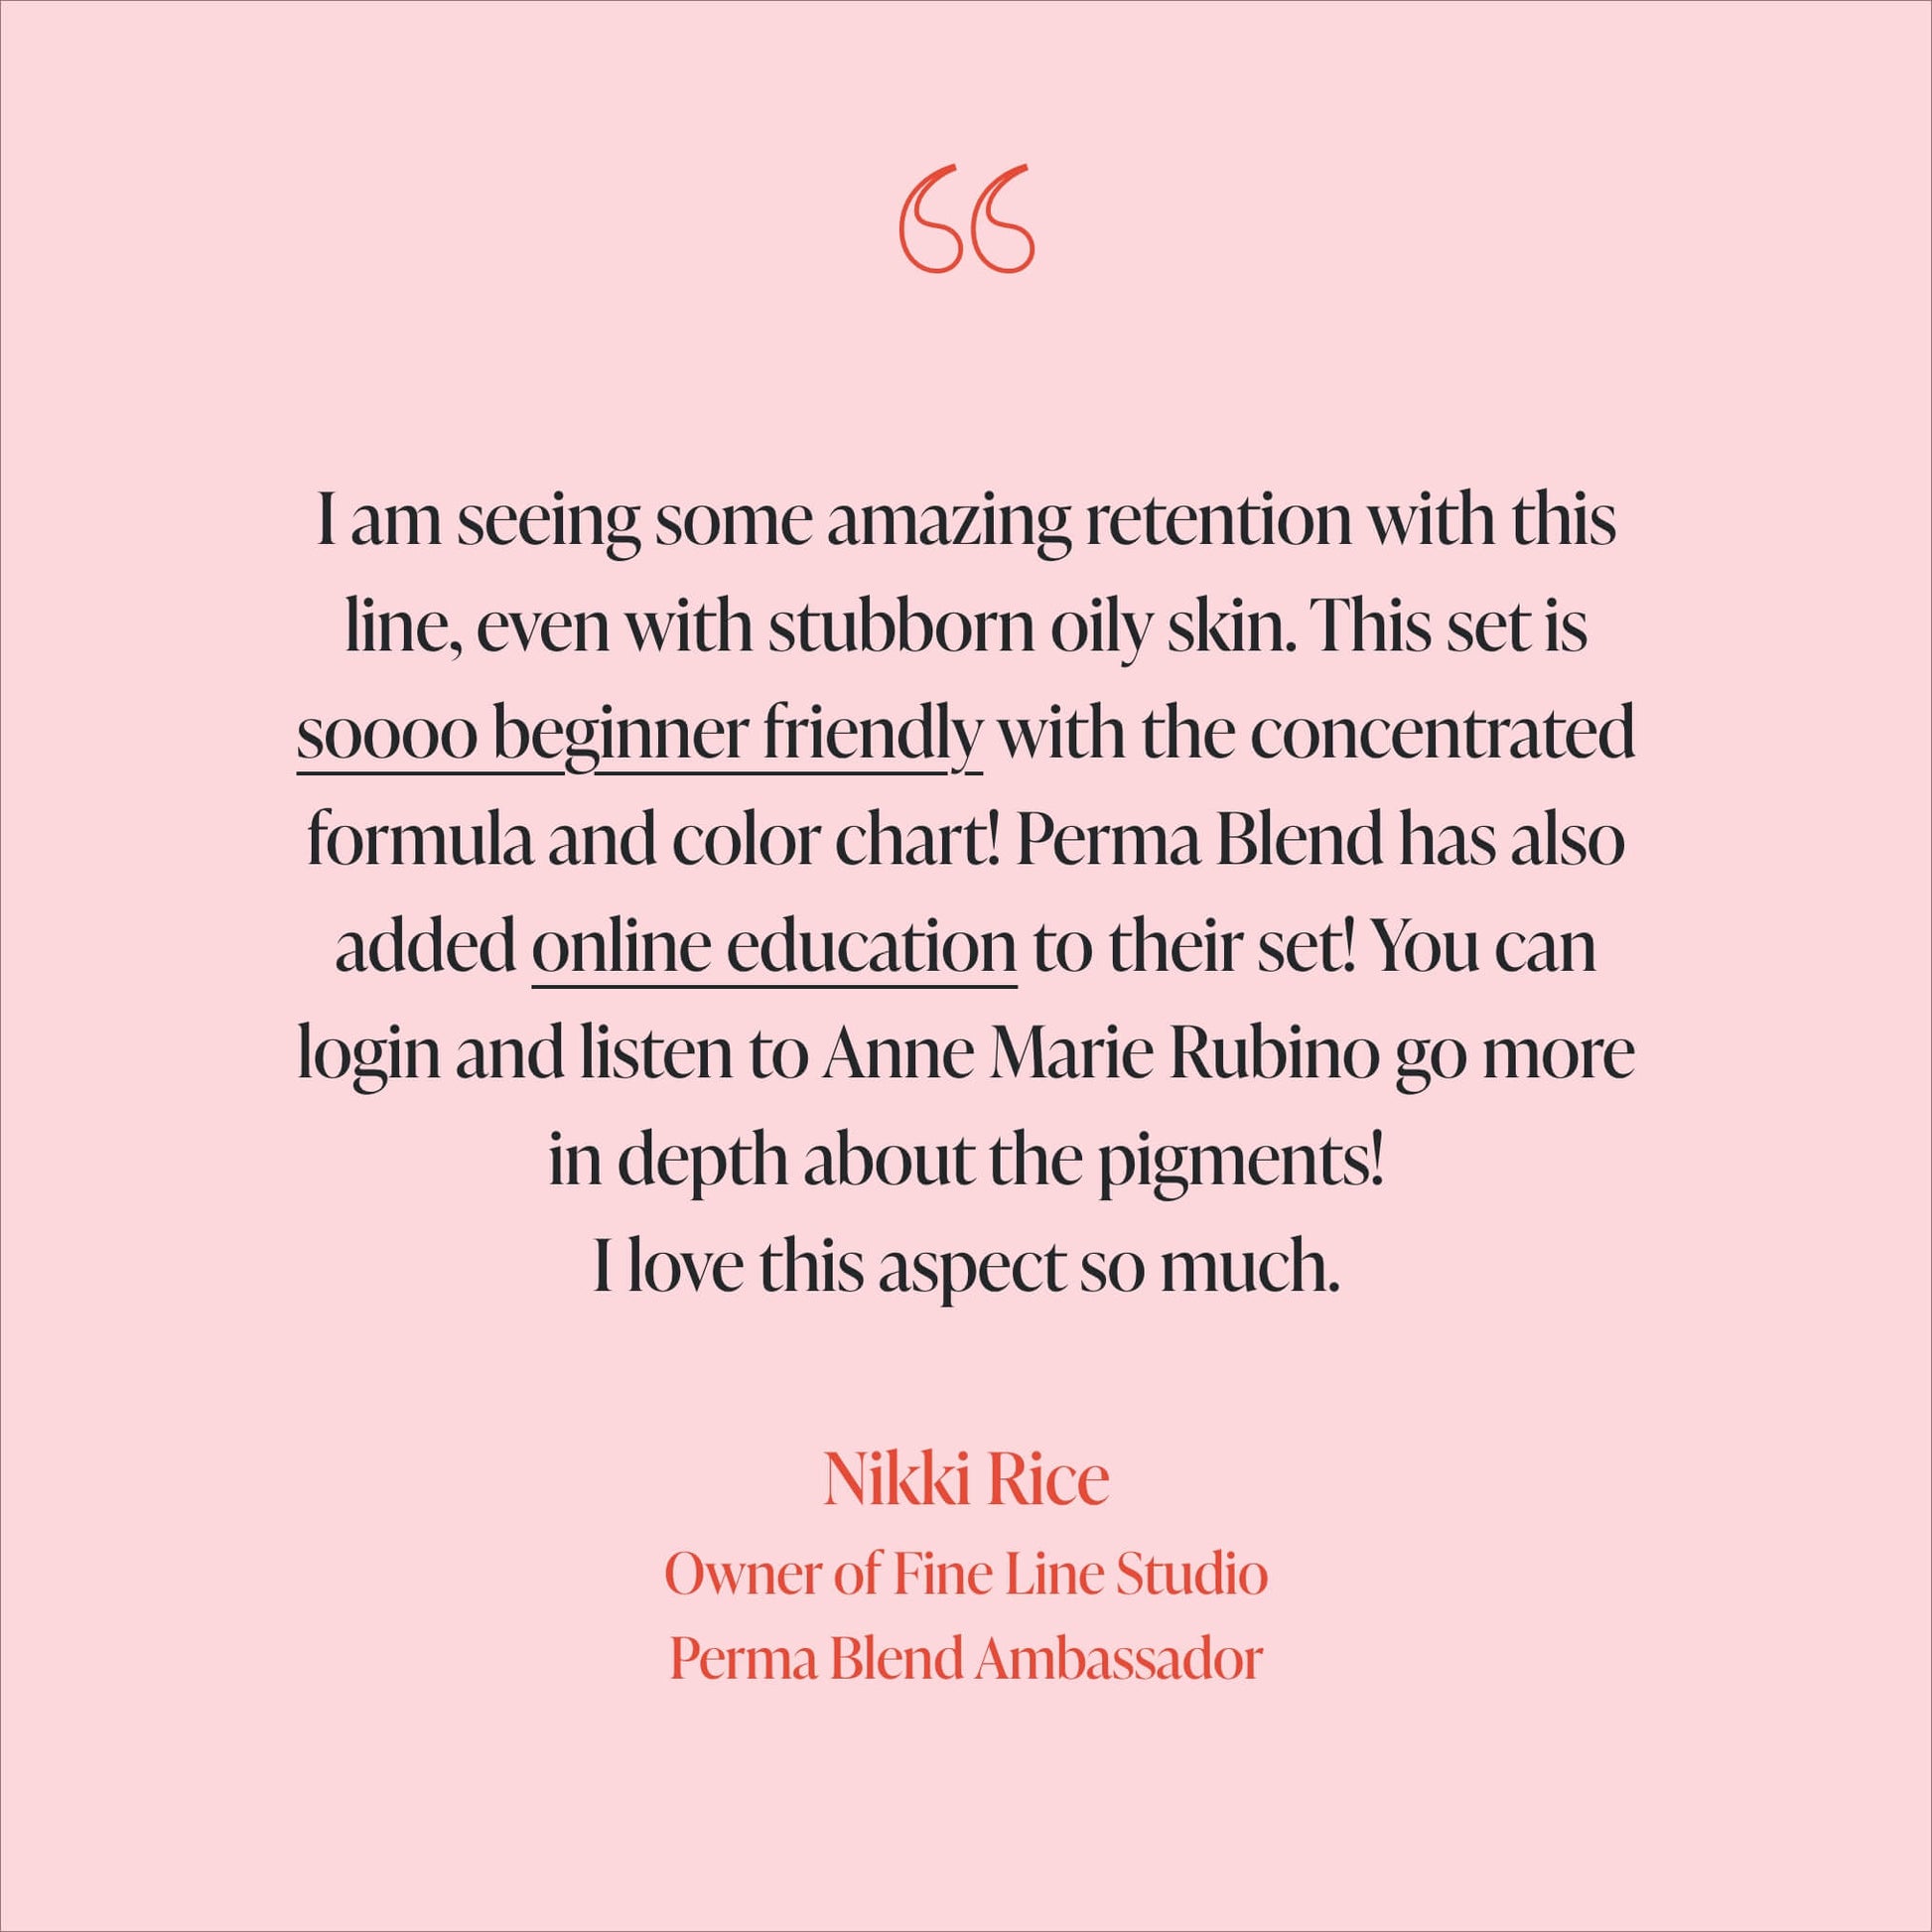 Nikki Rice Testimonial - I am seeing some amazing retention with this line, even with stubborn oily skin. This set is soooo beginner friendly with the concentrated formula and color chart! Perma Blend has also added online education to their set! You can login and listen to Anne Marie Rubino go more in depth about the pigments! I love this aspect so much. 